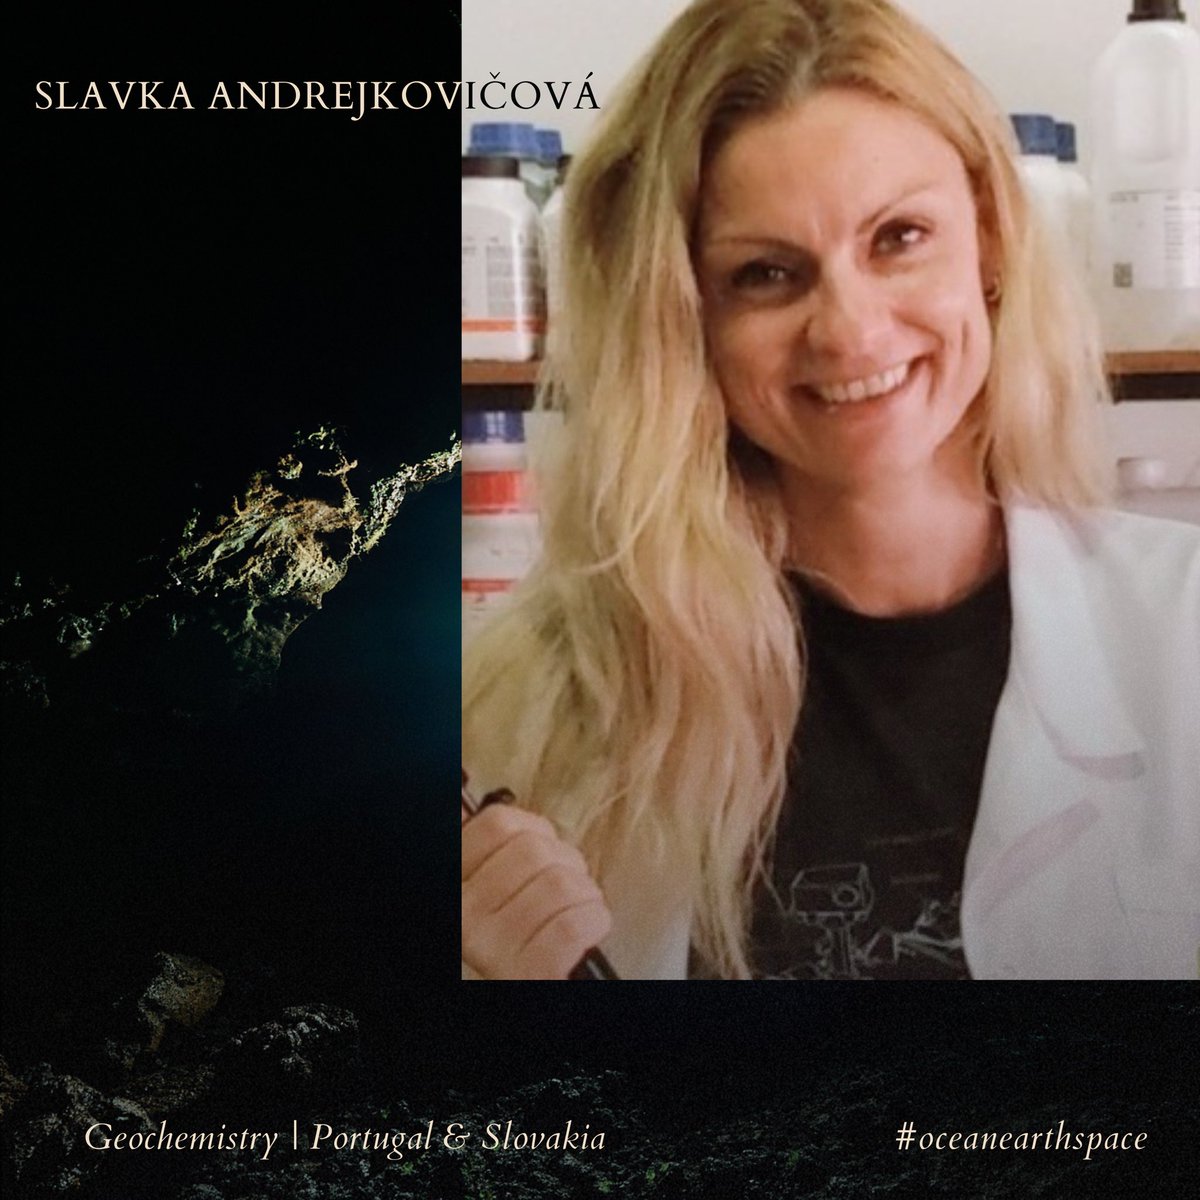 Introducing our Mission Control/Geochemist, Slavka Andrejkovičová. She is a geochemical & nuclear chemical expert focused on astrogeology science. She is the PI of the GeoBioTec research unit at the @UnivAveiro & a Special Expert Scientist for the NASA SAM team. #teamcamões